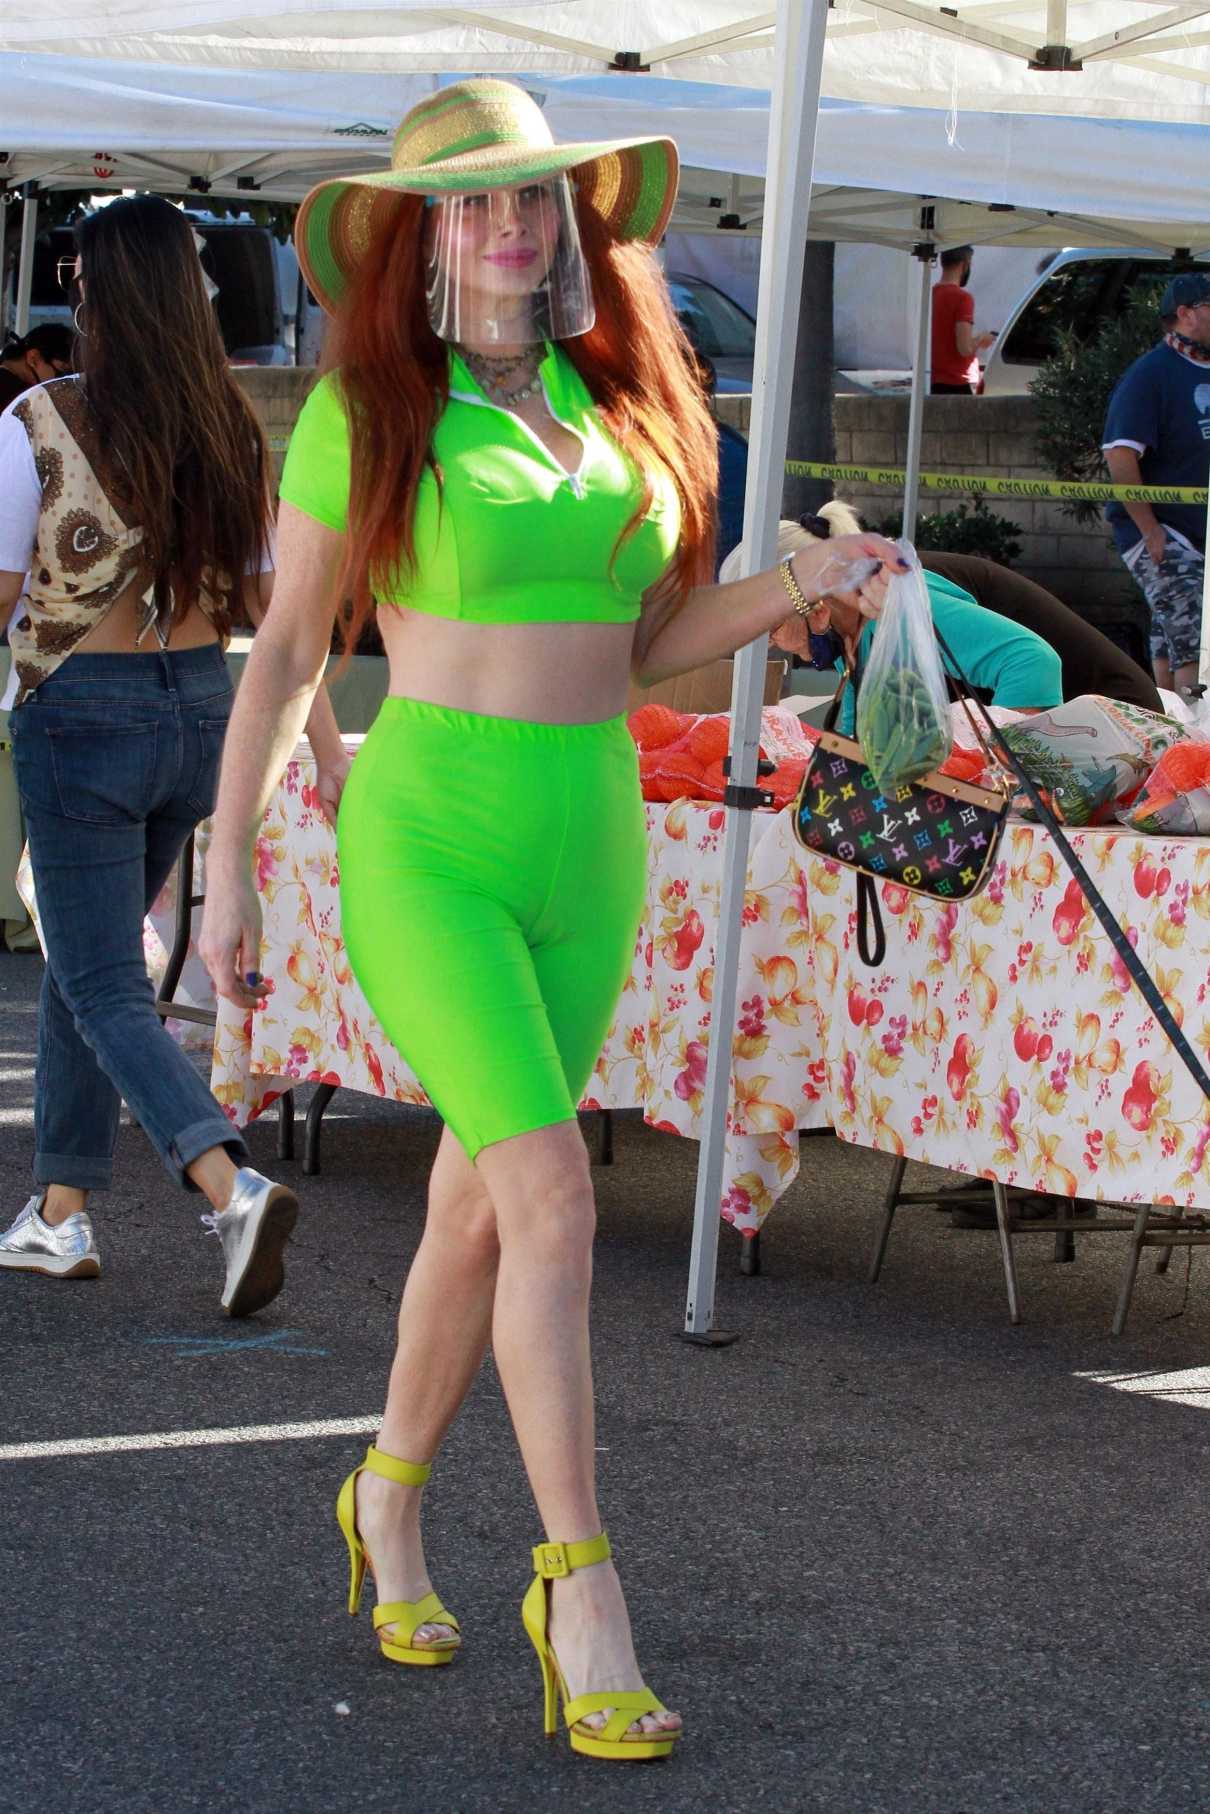 Phoebe Price in a Neon Green Outfit